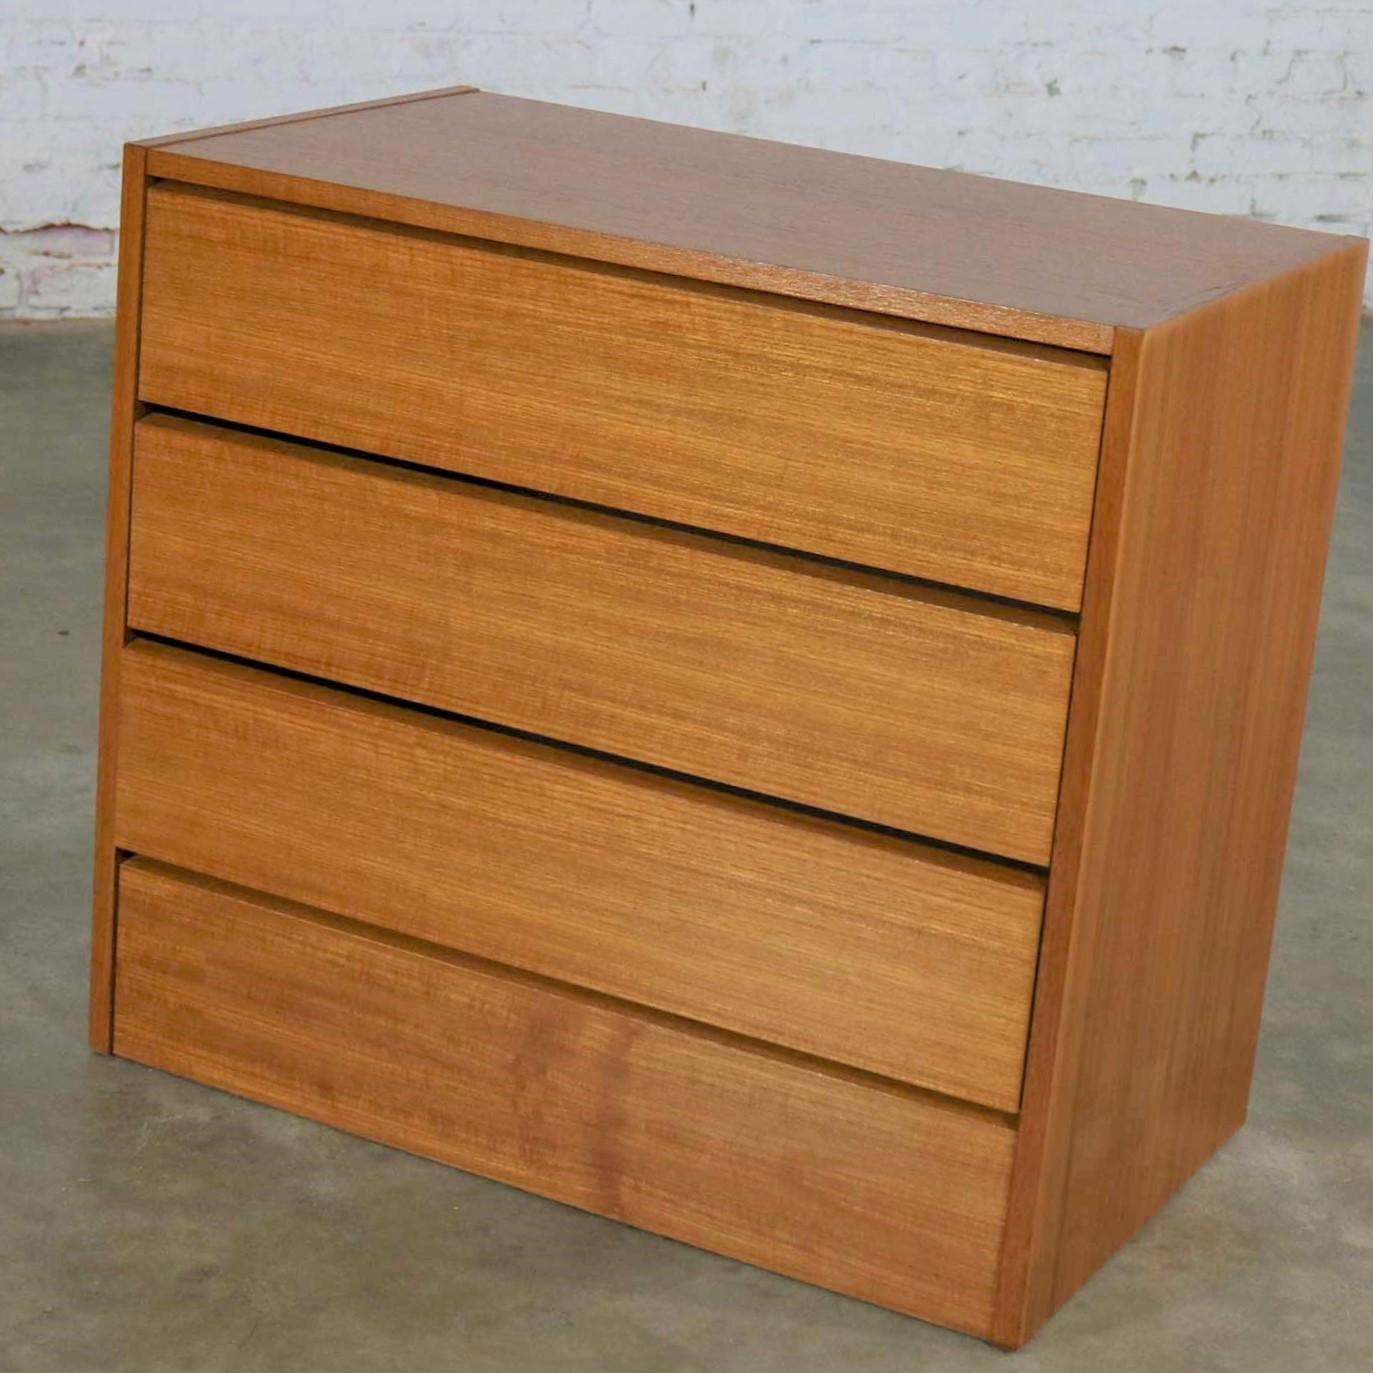 3 drawer small chest